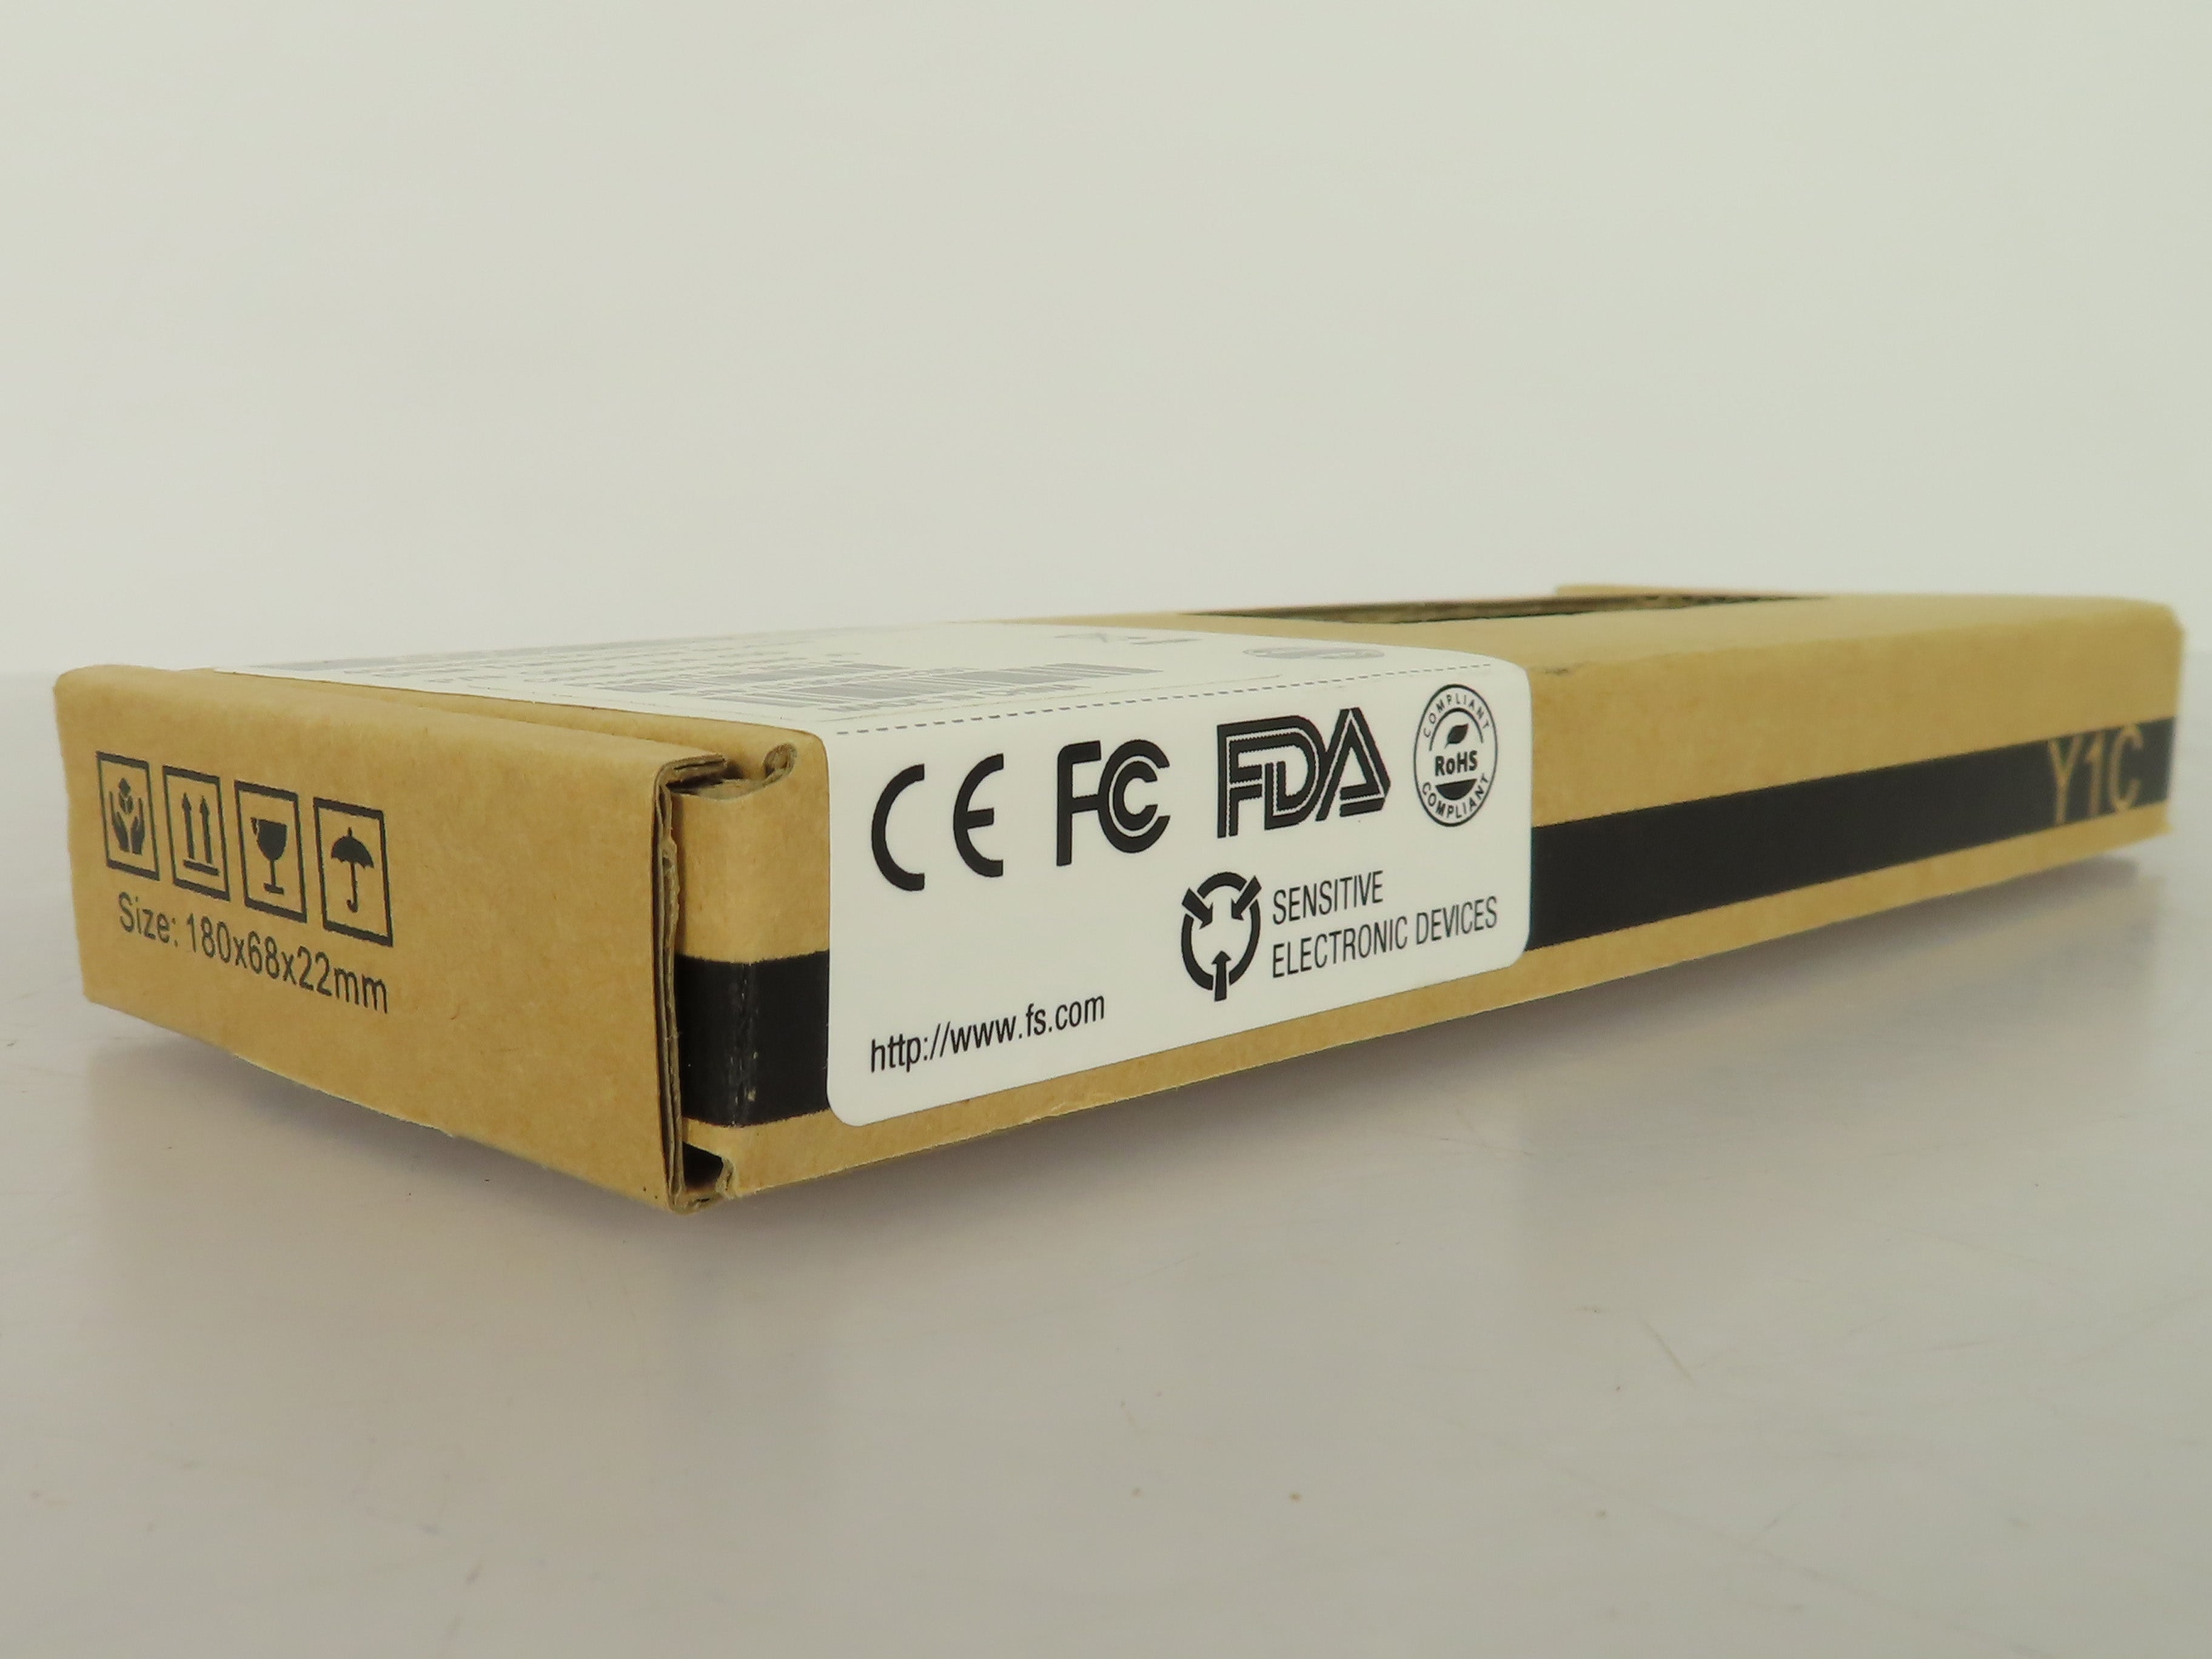 40GBASE-LR4 QSFP+ 1310nm 10km DOM Duplex LC SMF Optical Transceiver Module for FS Switches